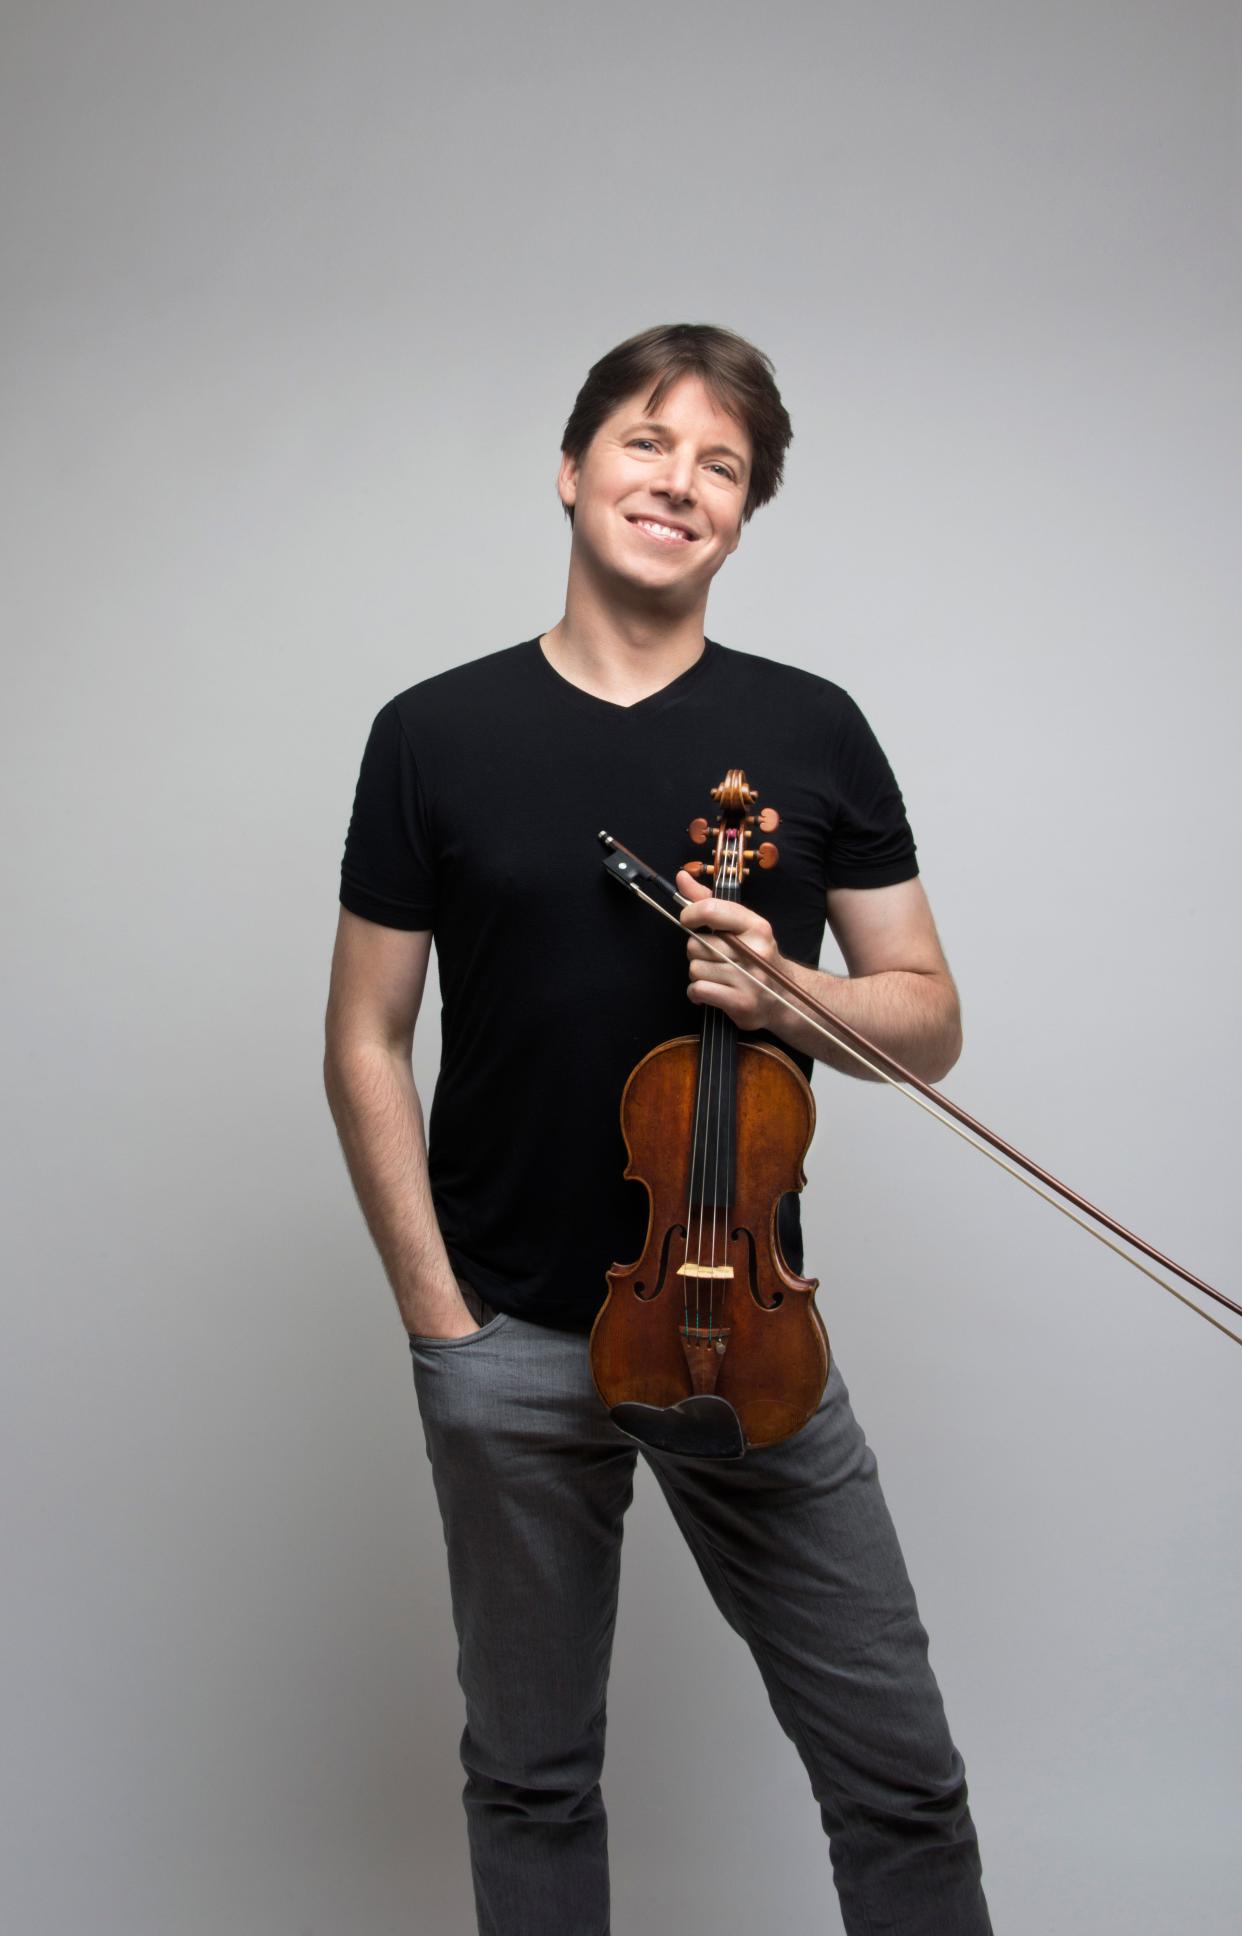 Violinist Joshua Bell performs with the Palm Beach Symphony on April 16.